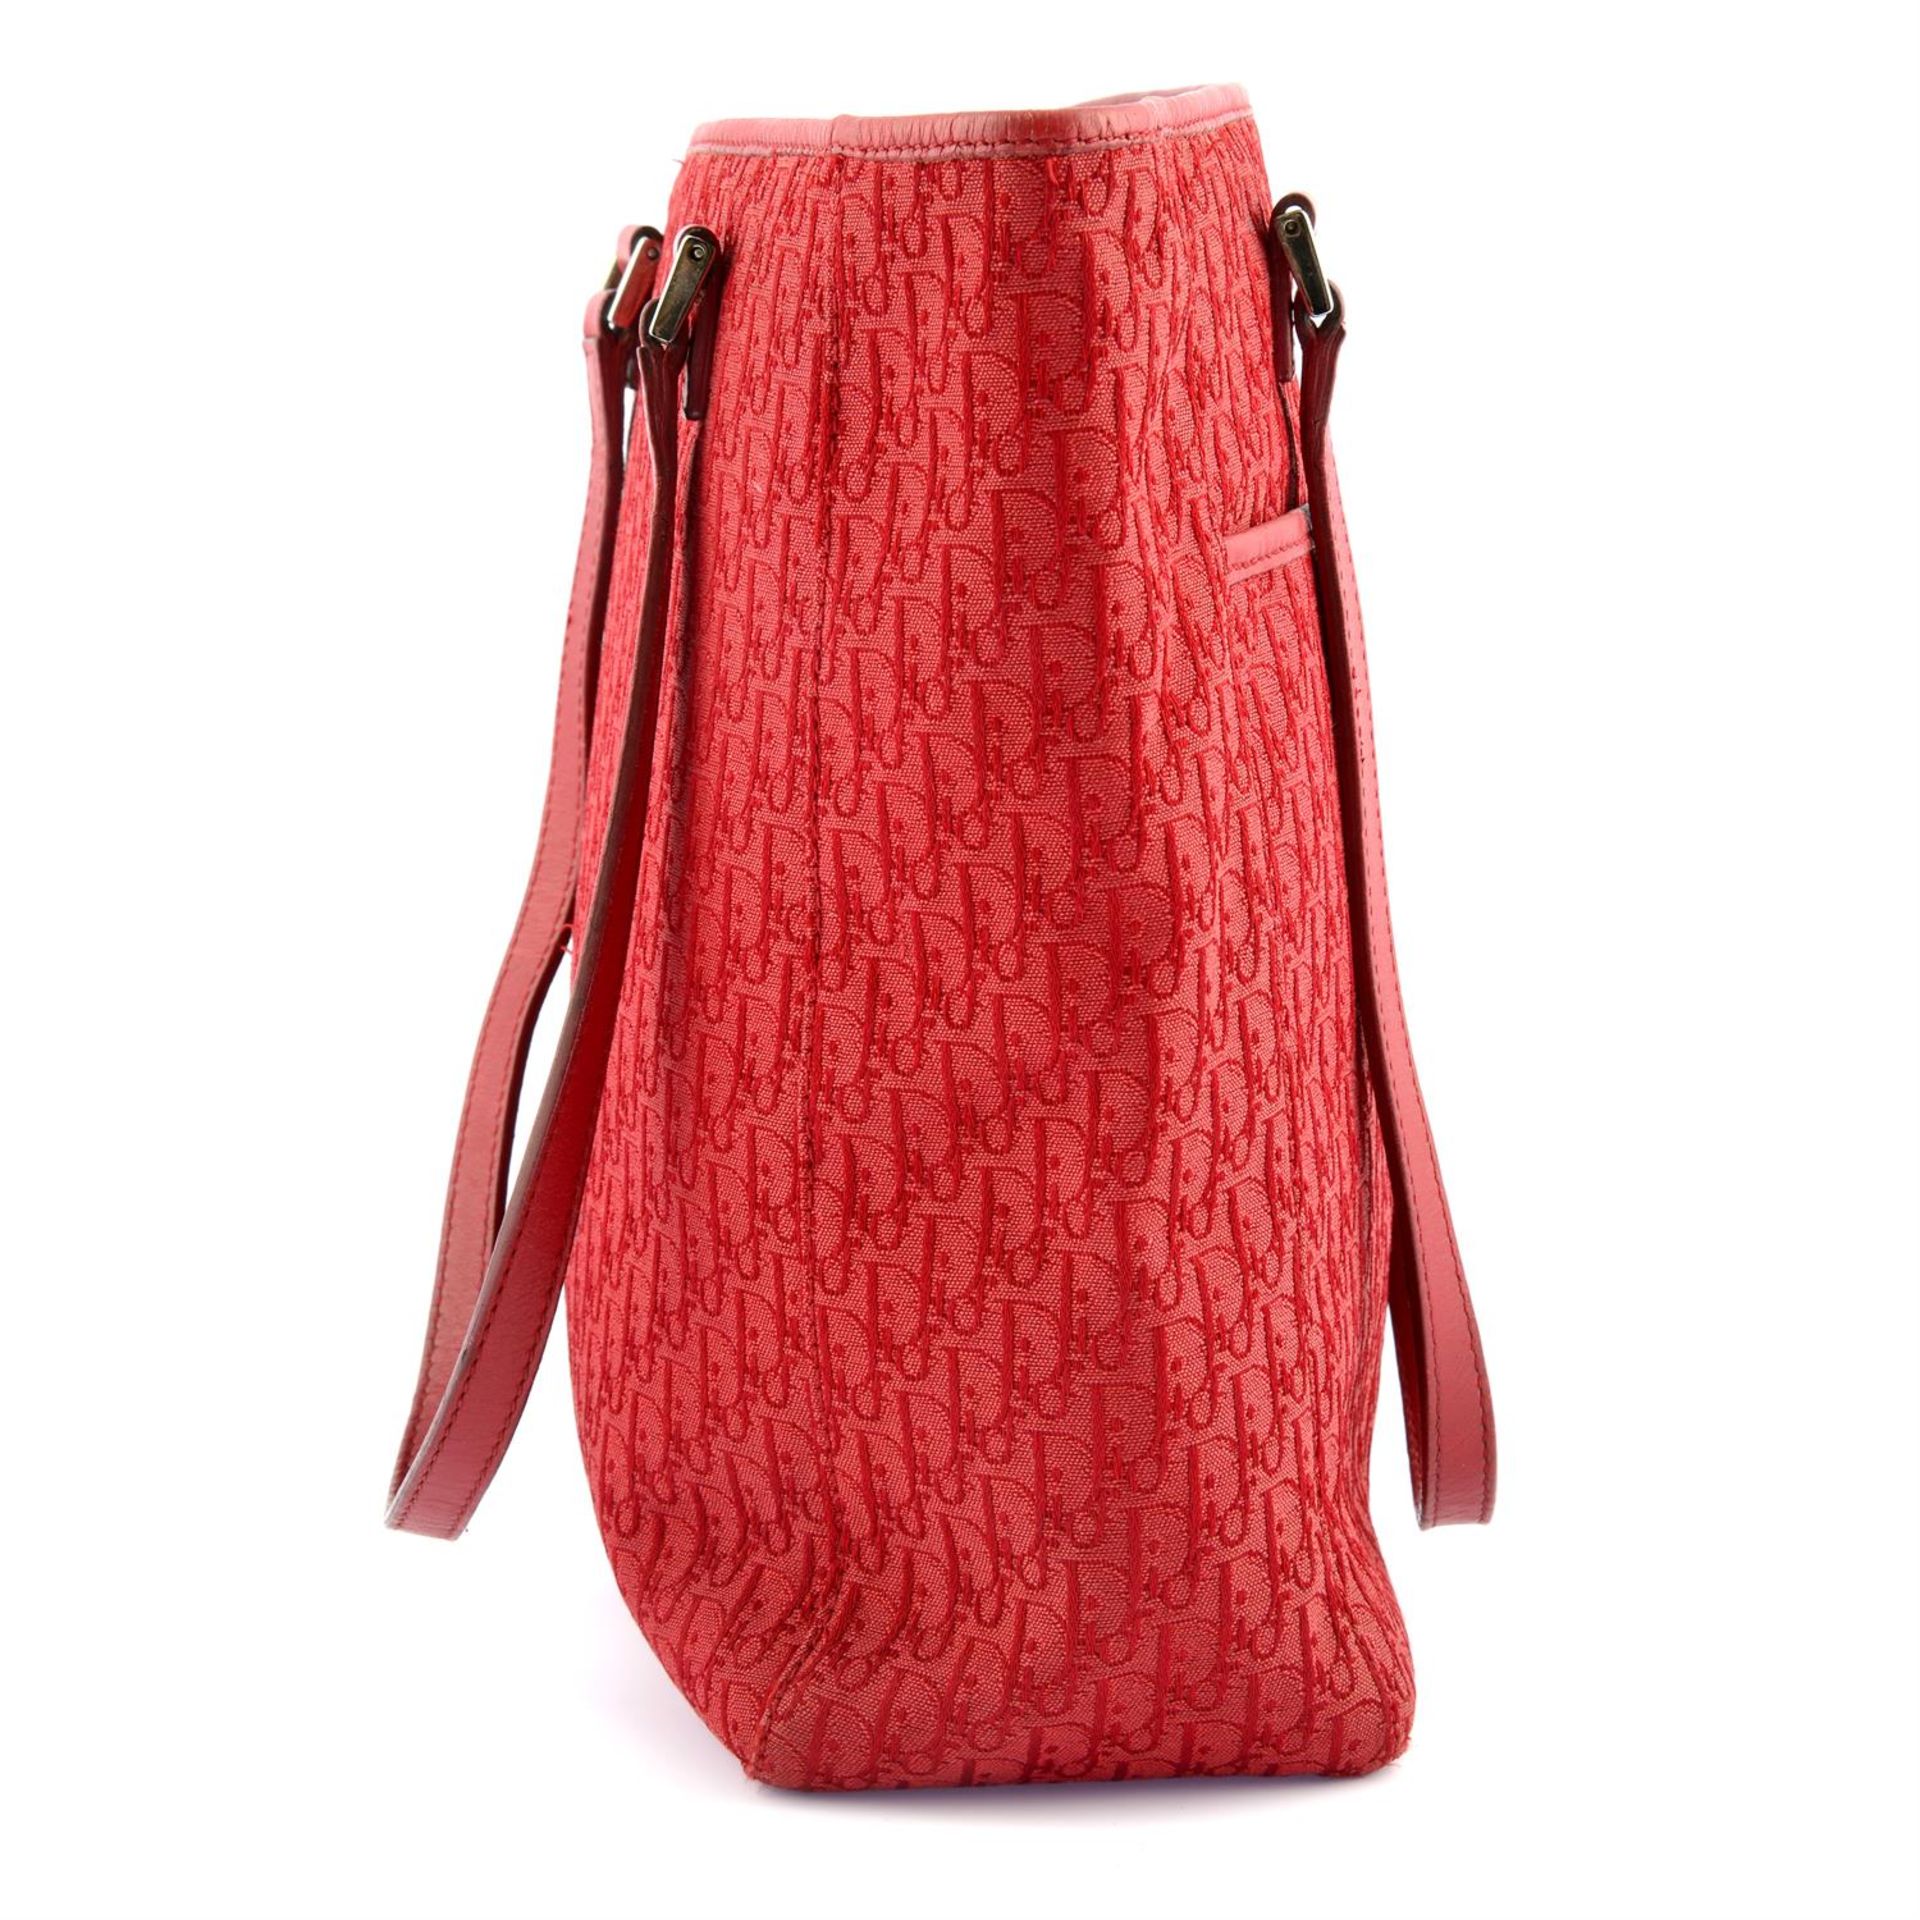 CHRISTIAN DIOR - a red canvas Trotter tote. - Image 3 of 5